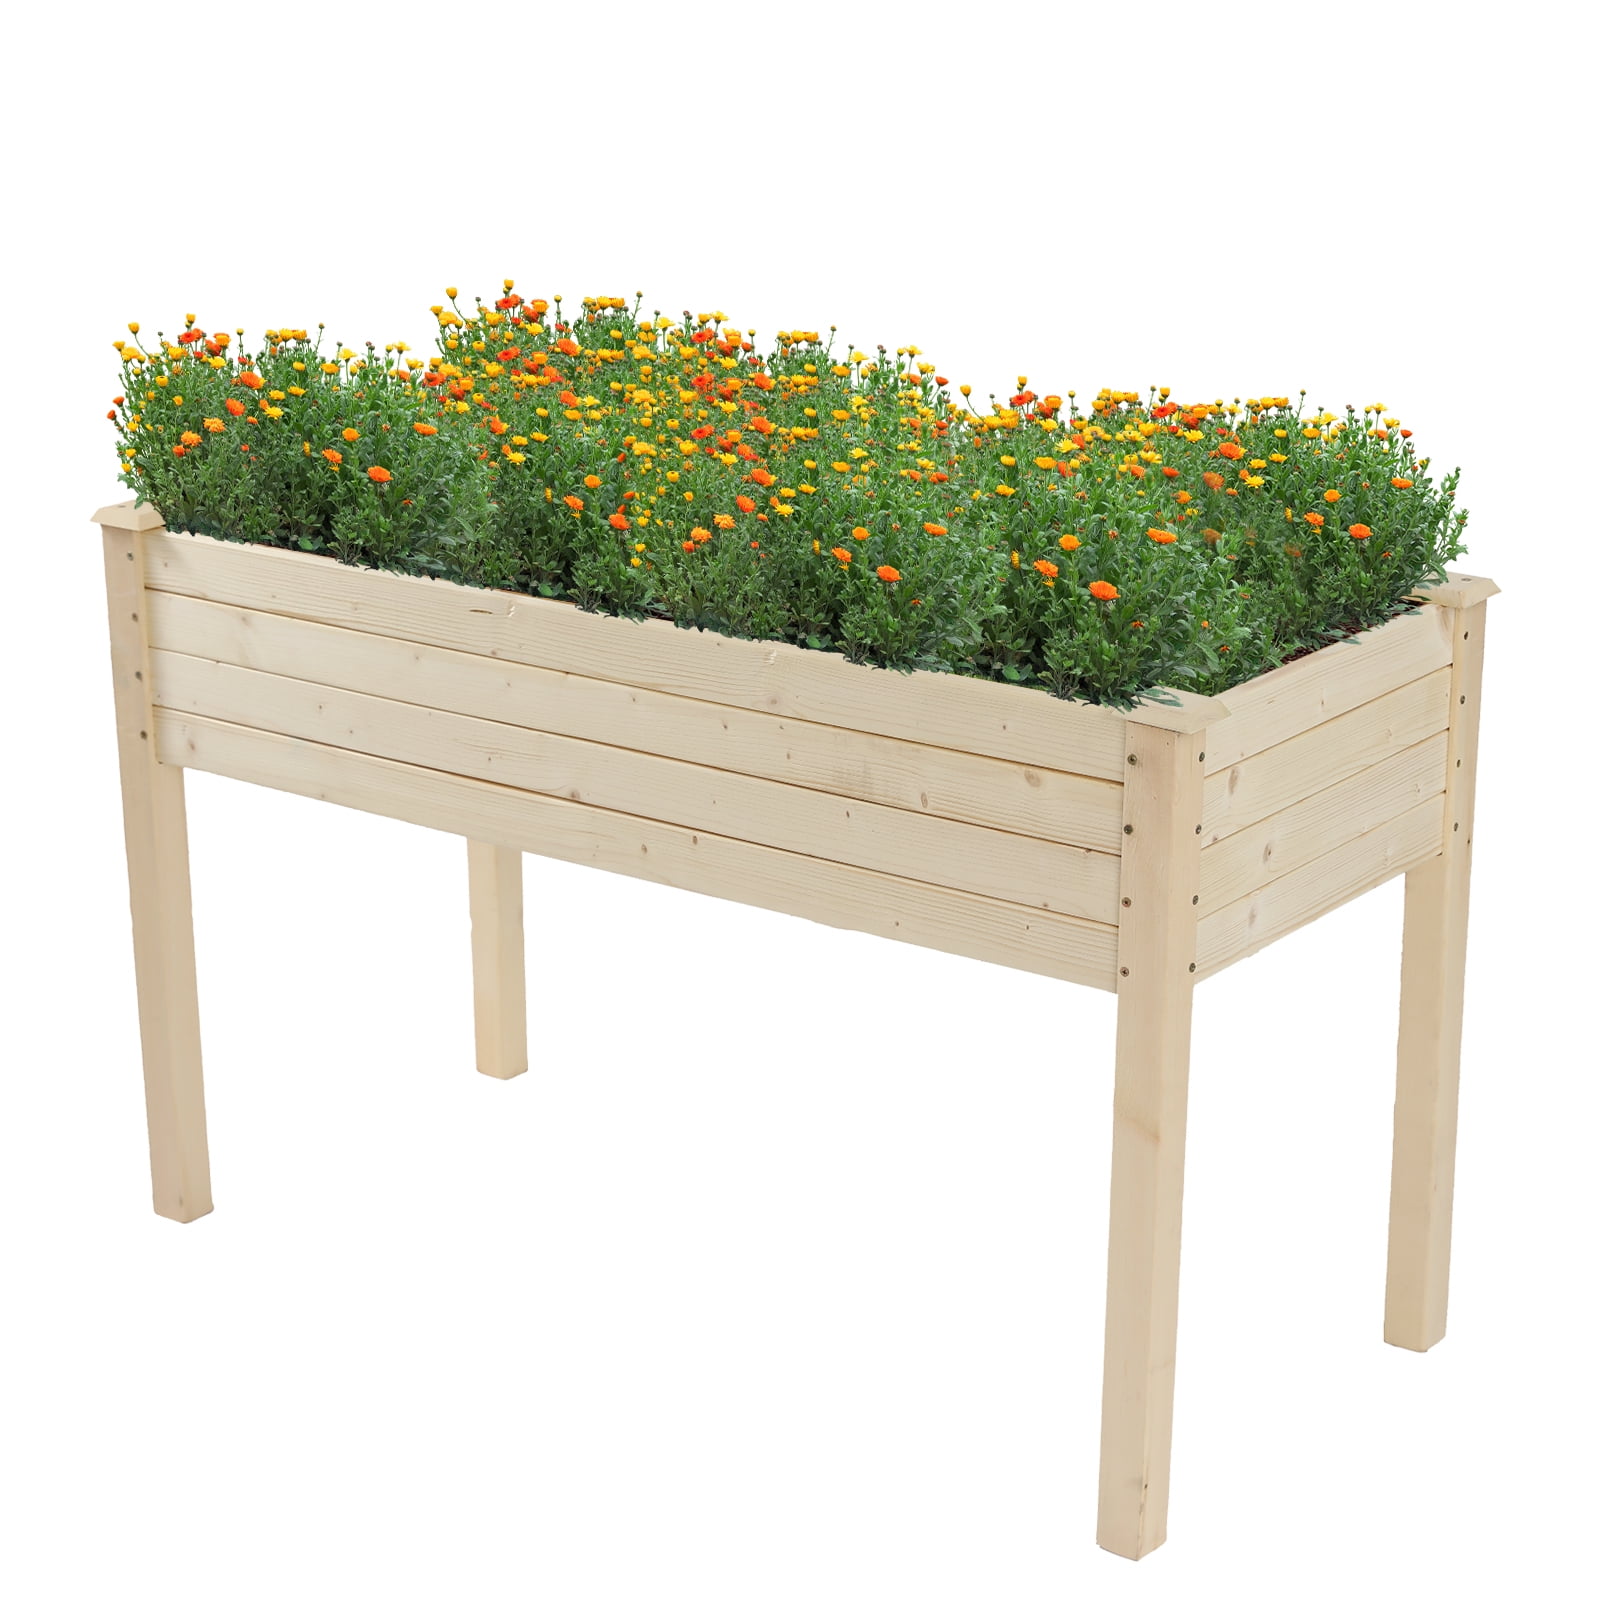 Patio Outdoor Solid Wood Raised Garden Bed Kit Elevated Wood Planter Garden Box Stand for for Backyard 4x4 FT